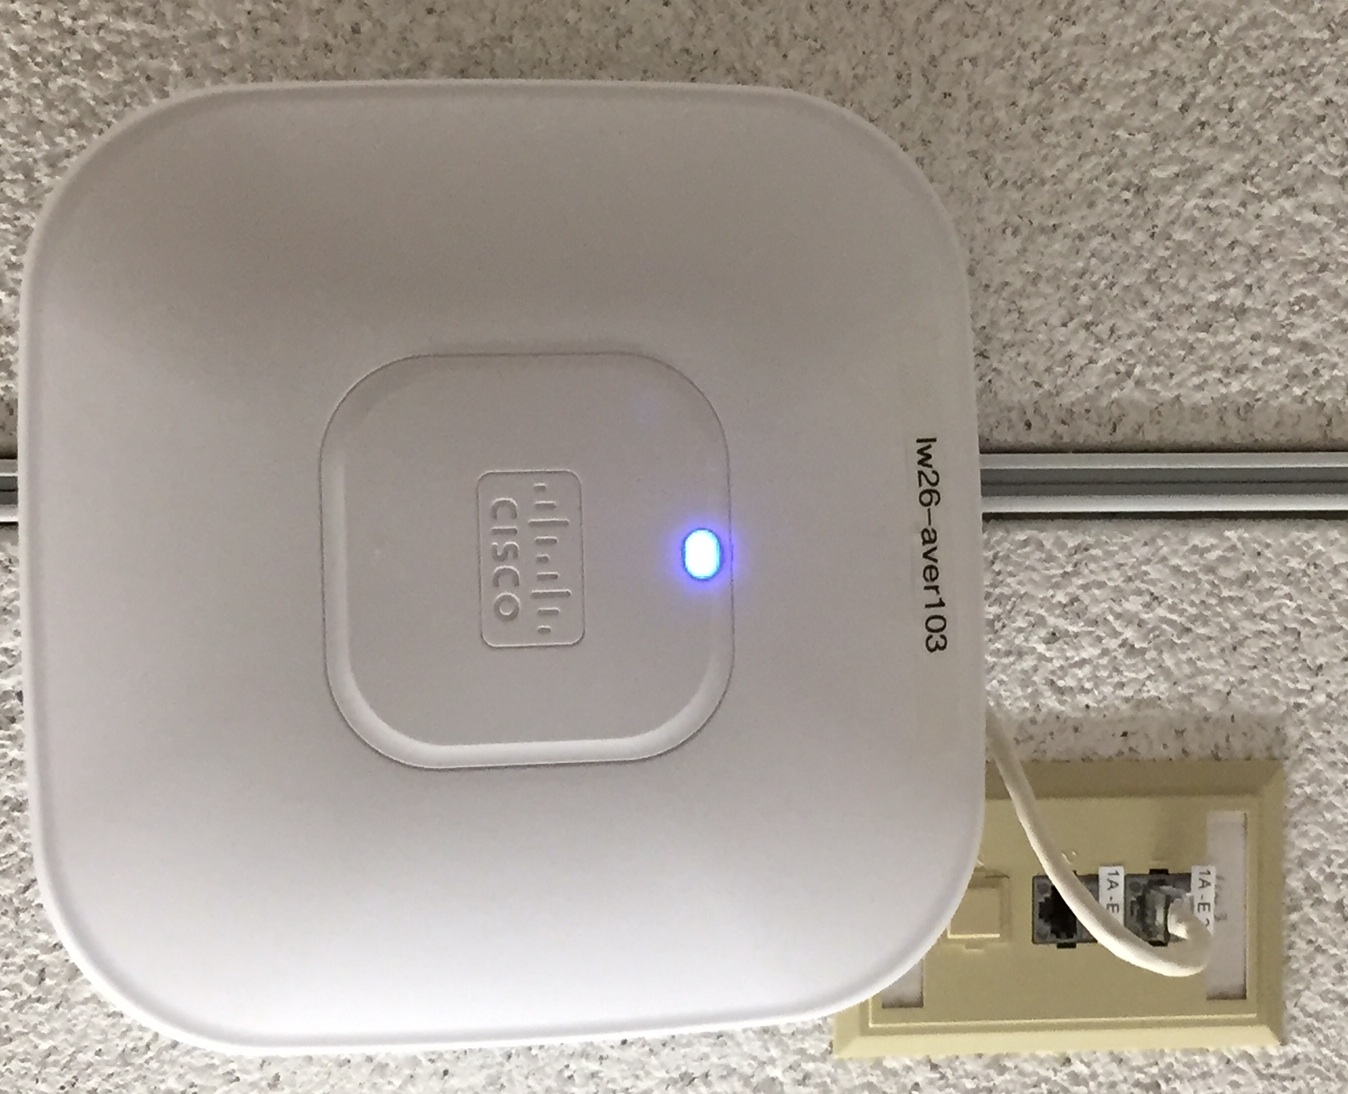 A new wireless access point like this one will be installed near the CSE Student Resource Center in the basement of Avery Hall.